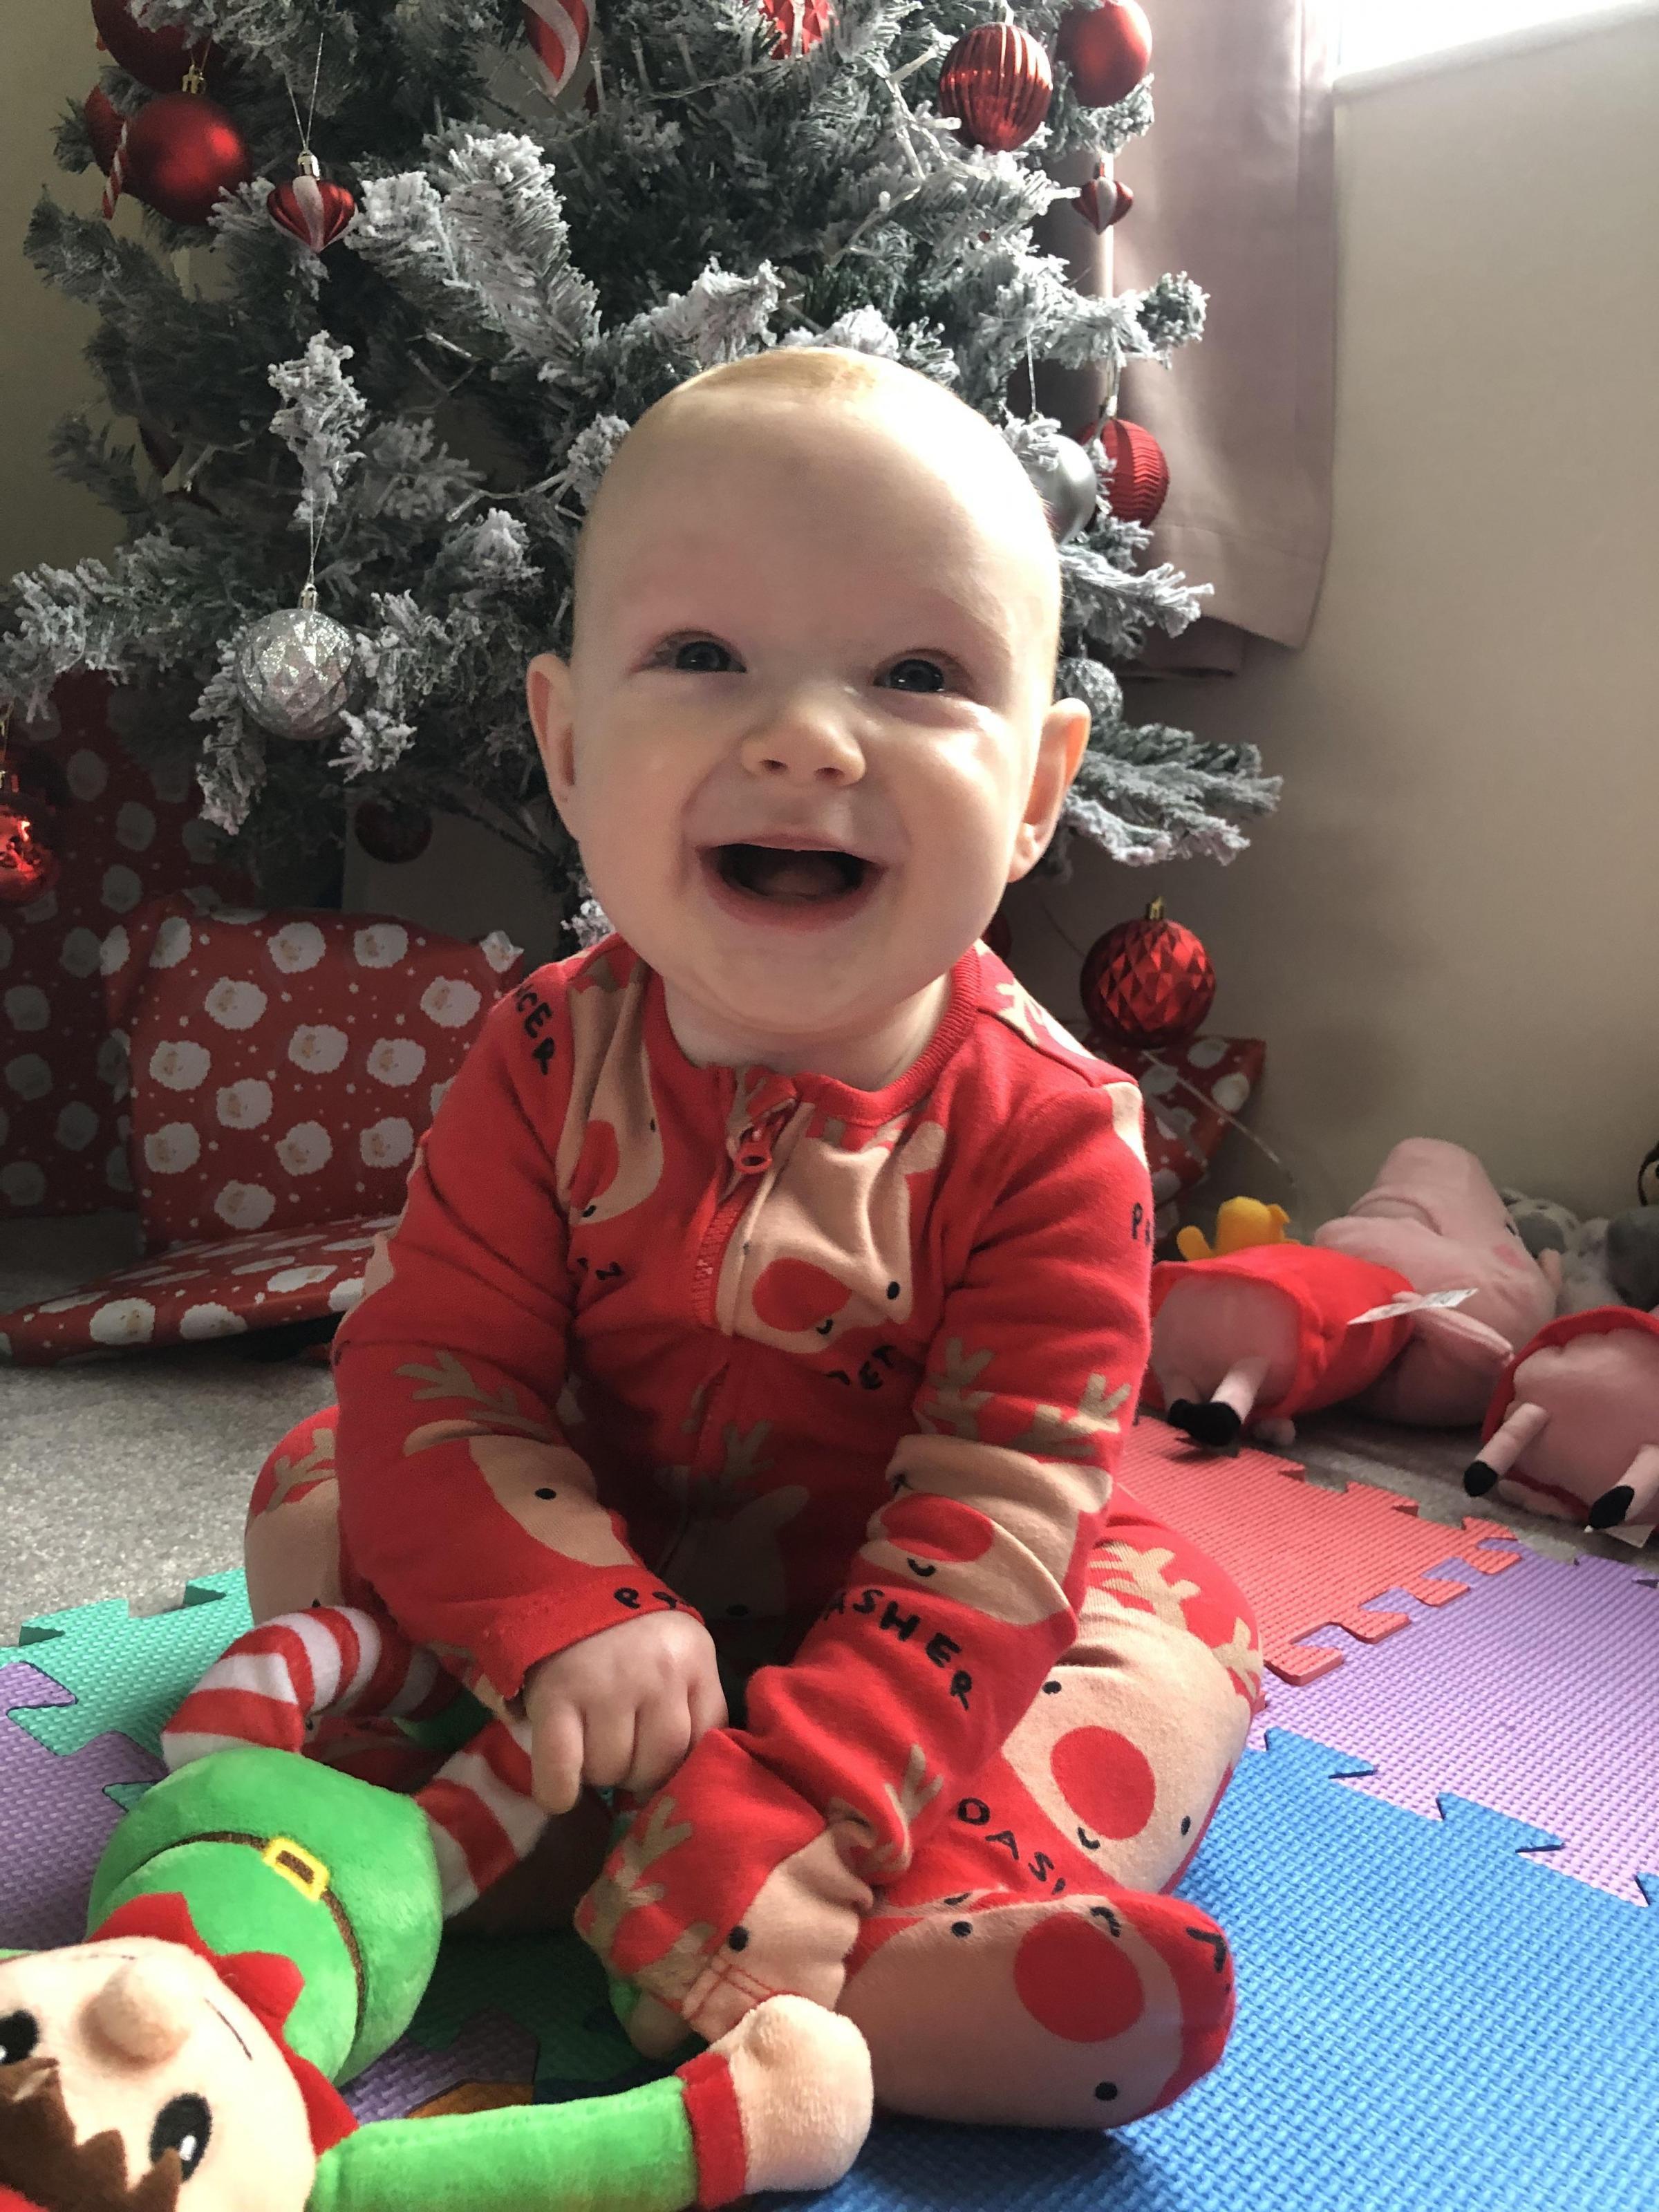 Holly Grindley, from Coedpoeth in Wrexham: Six-month-old River Griffiths playing with his toy elf under the Christmas tree.